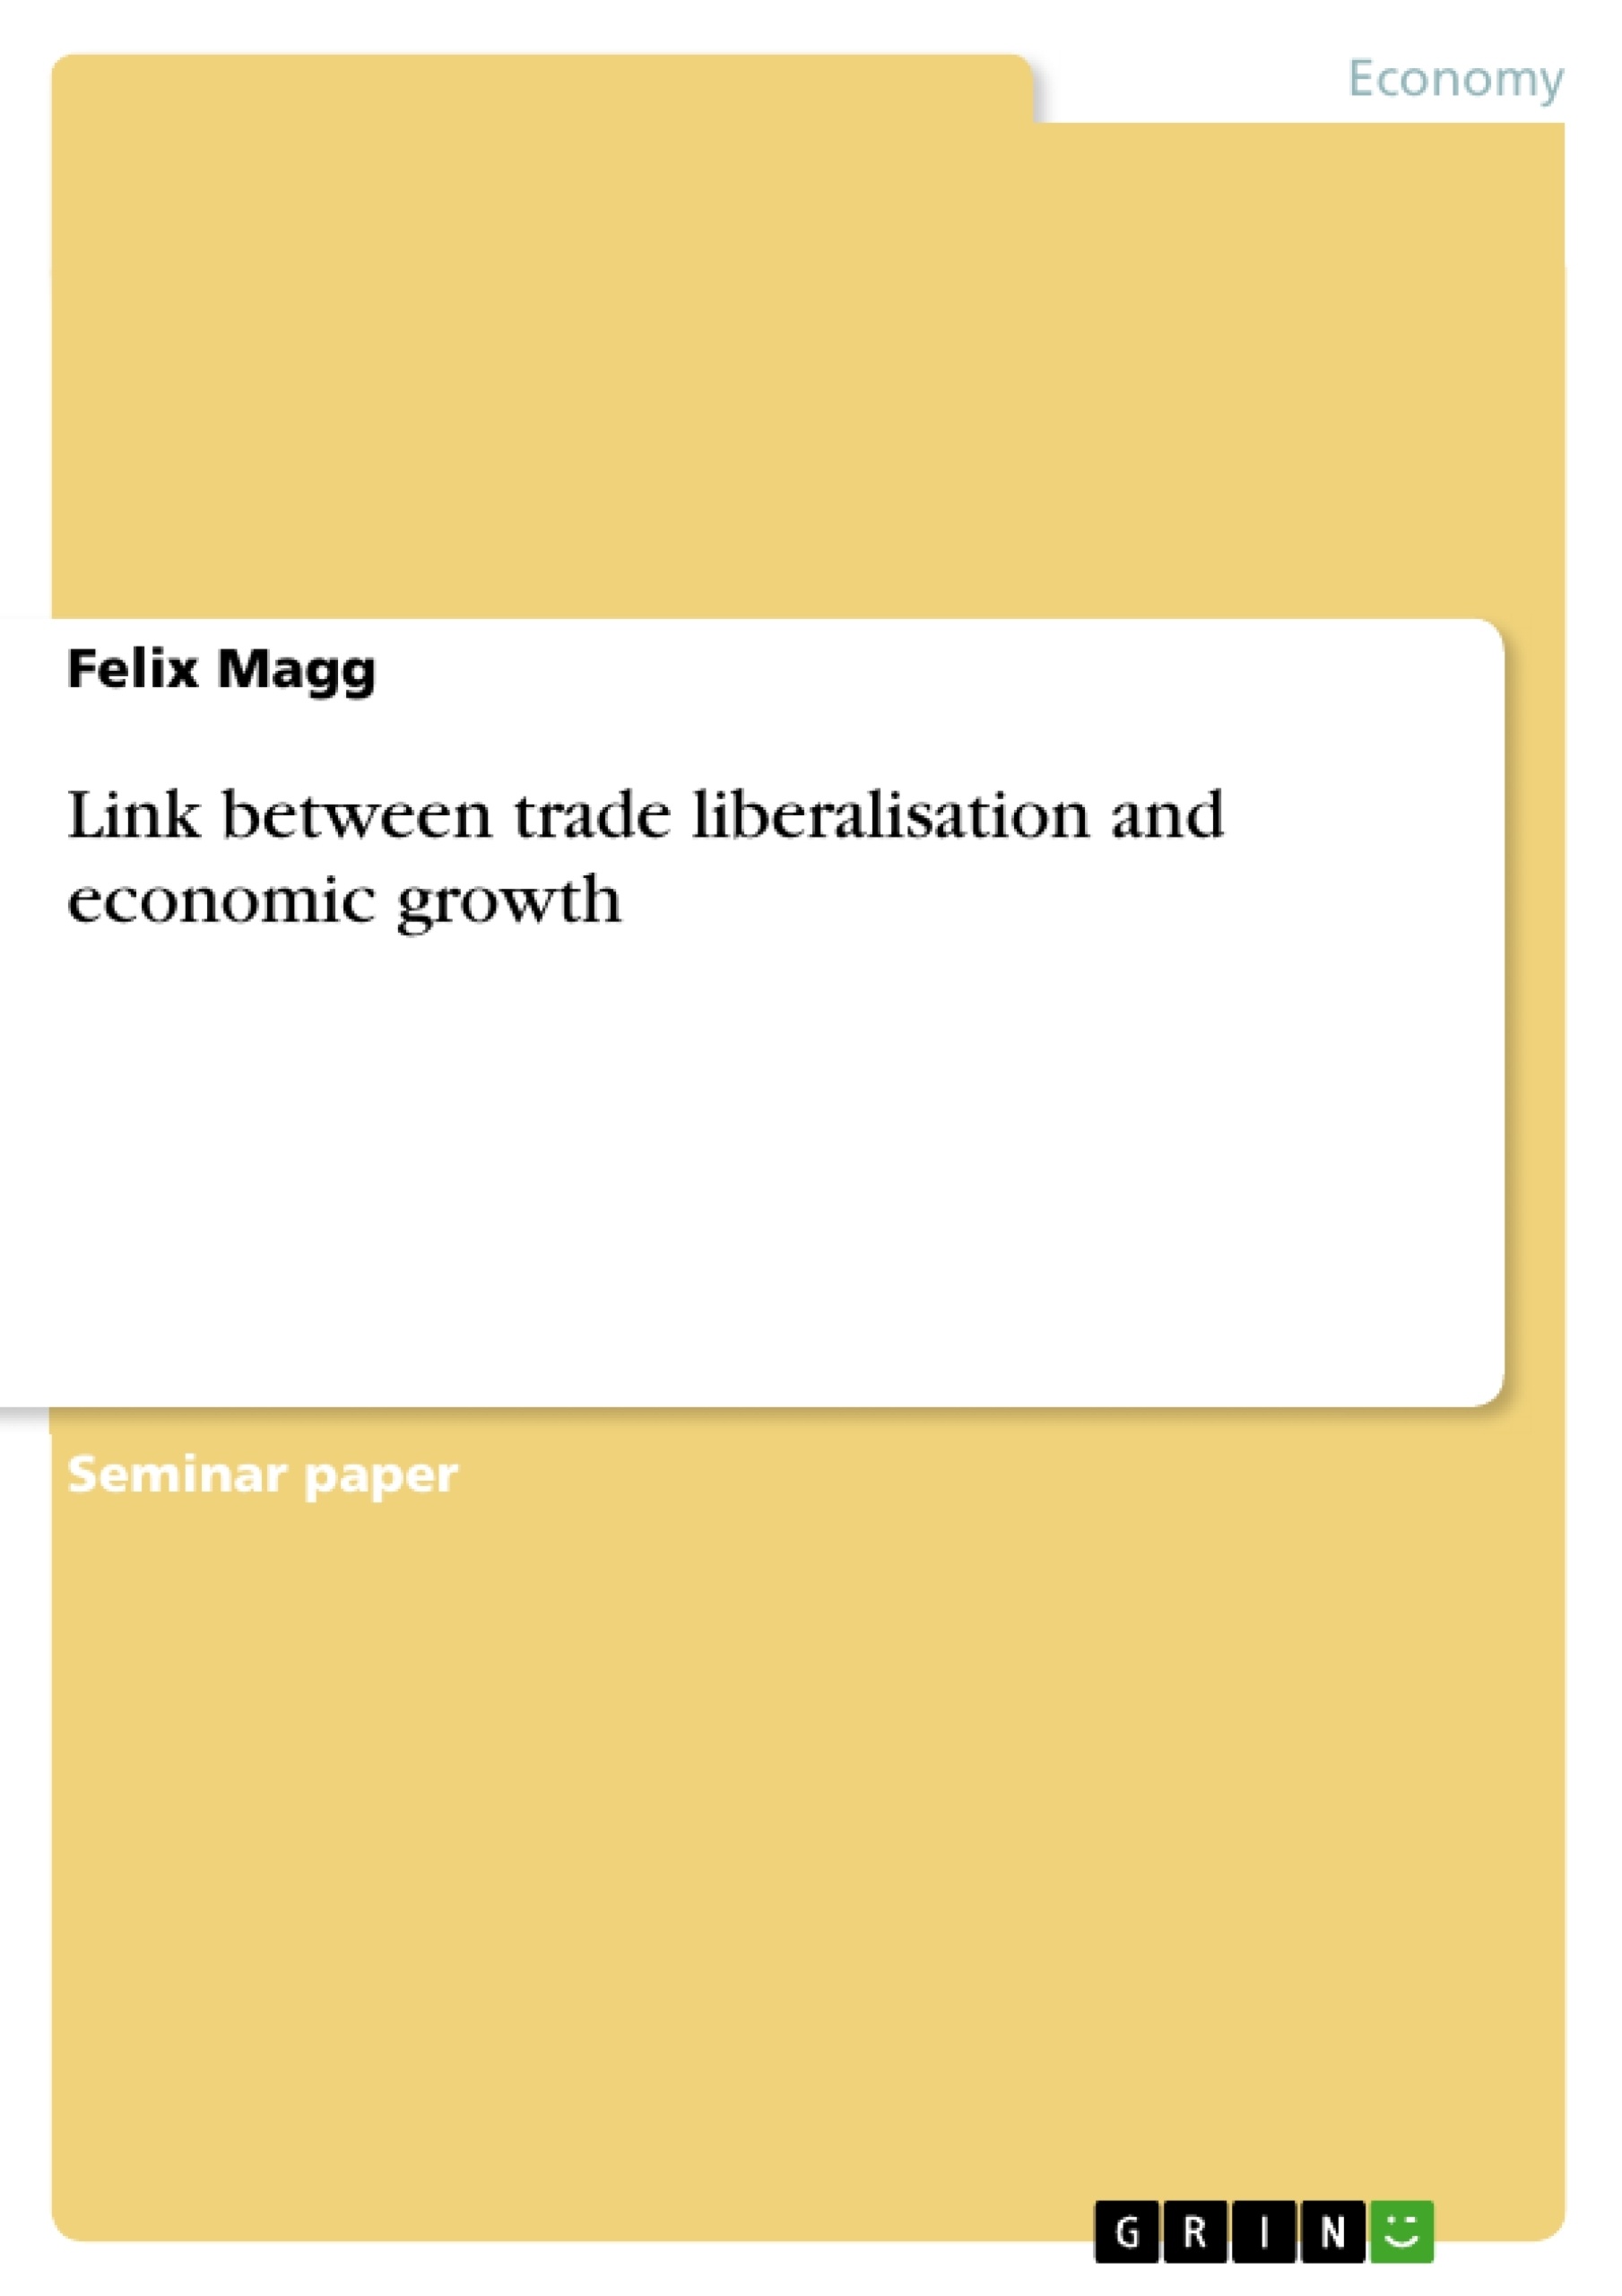 Title: Link between trade liberalisation and economic growth